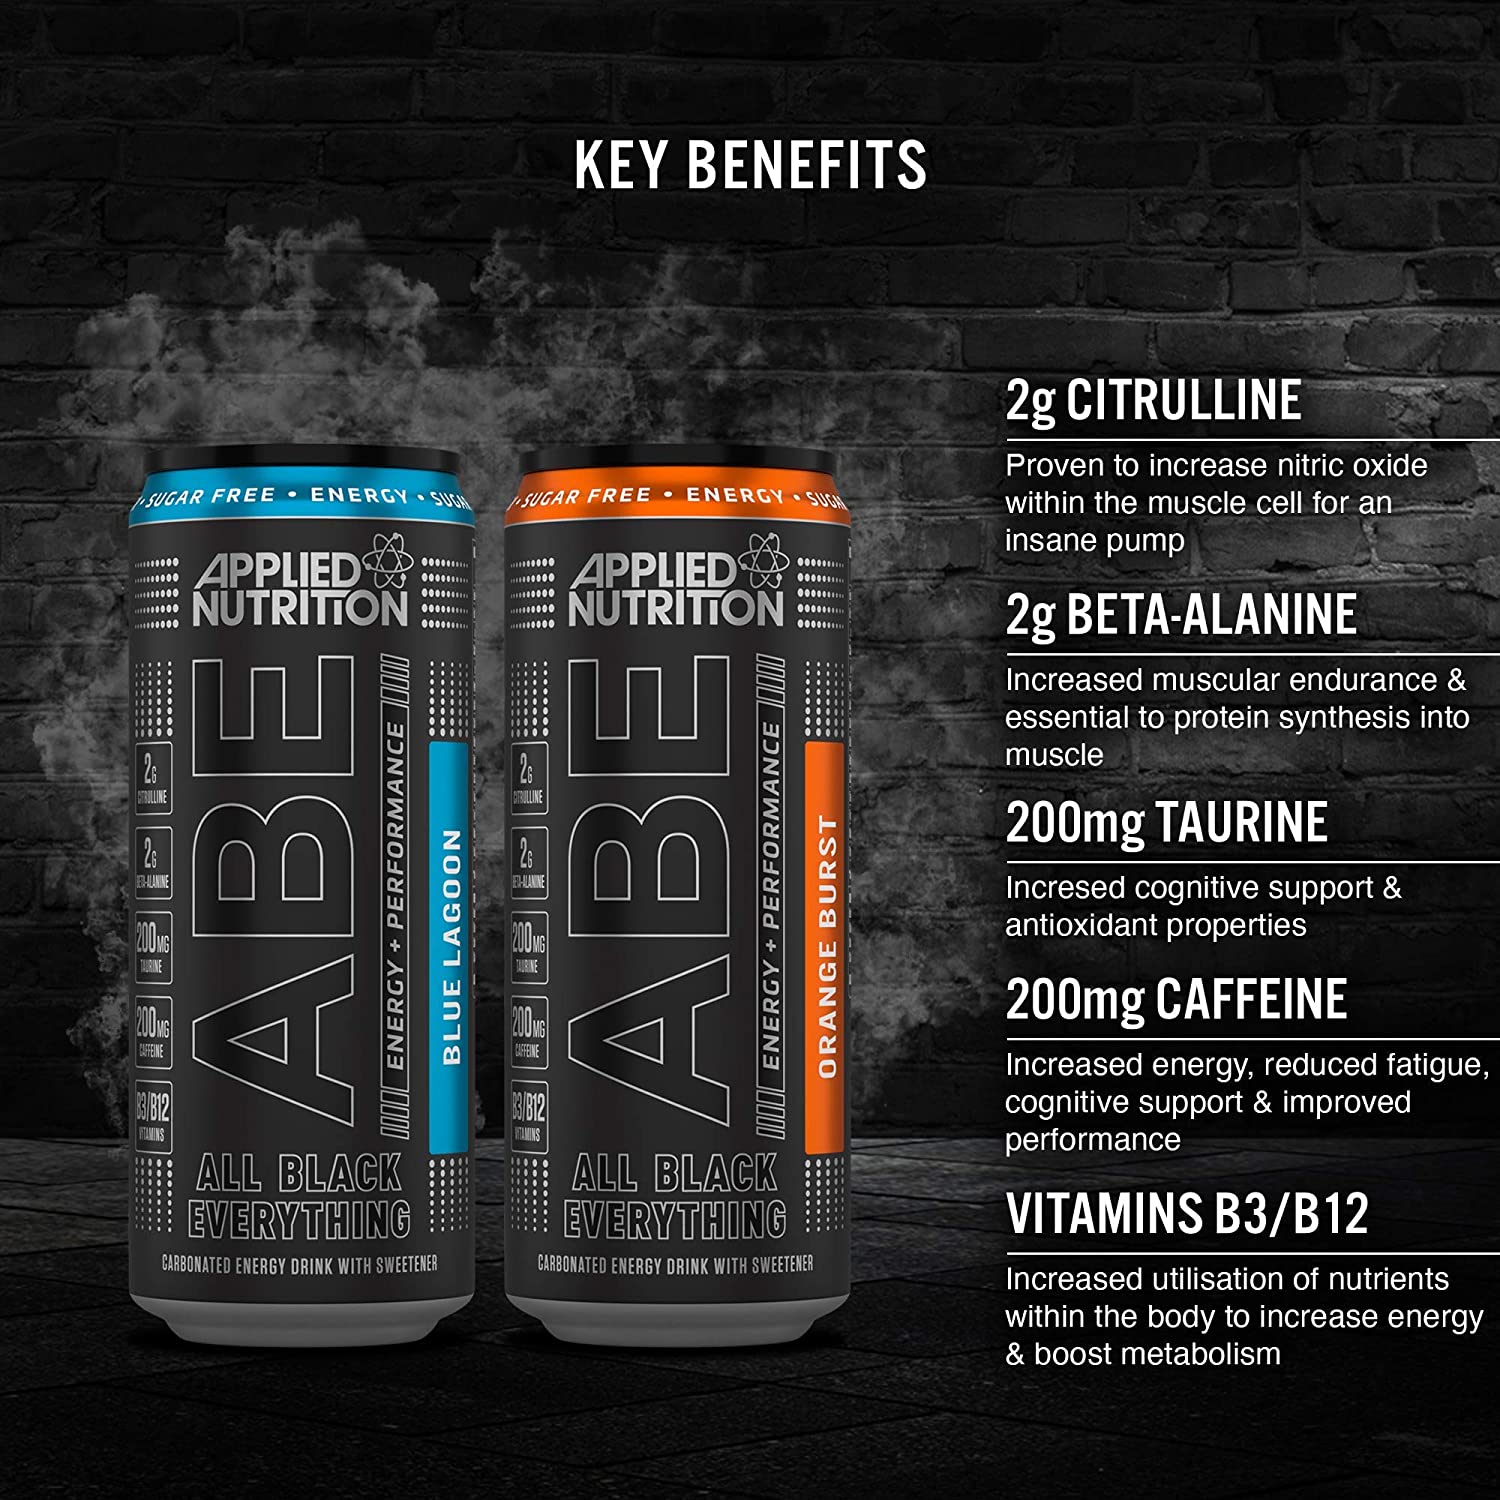 ABE Energy + Performance Cans, 24 Cans x 330ml